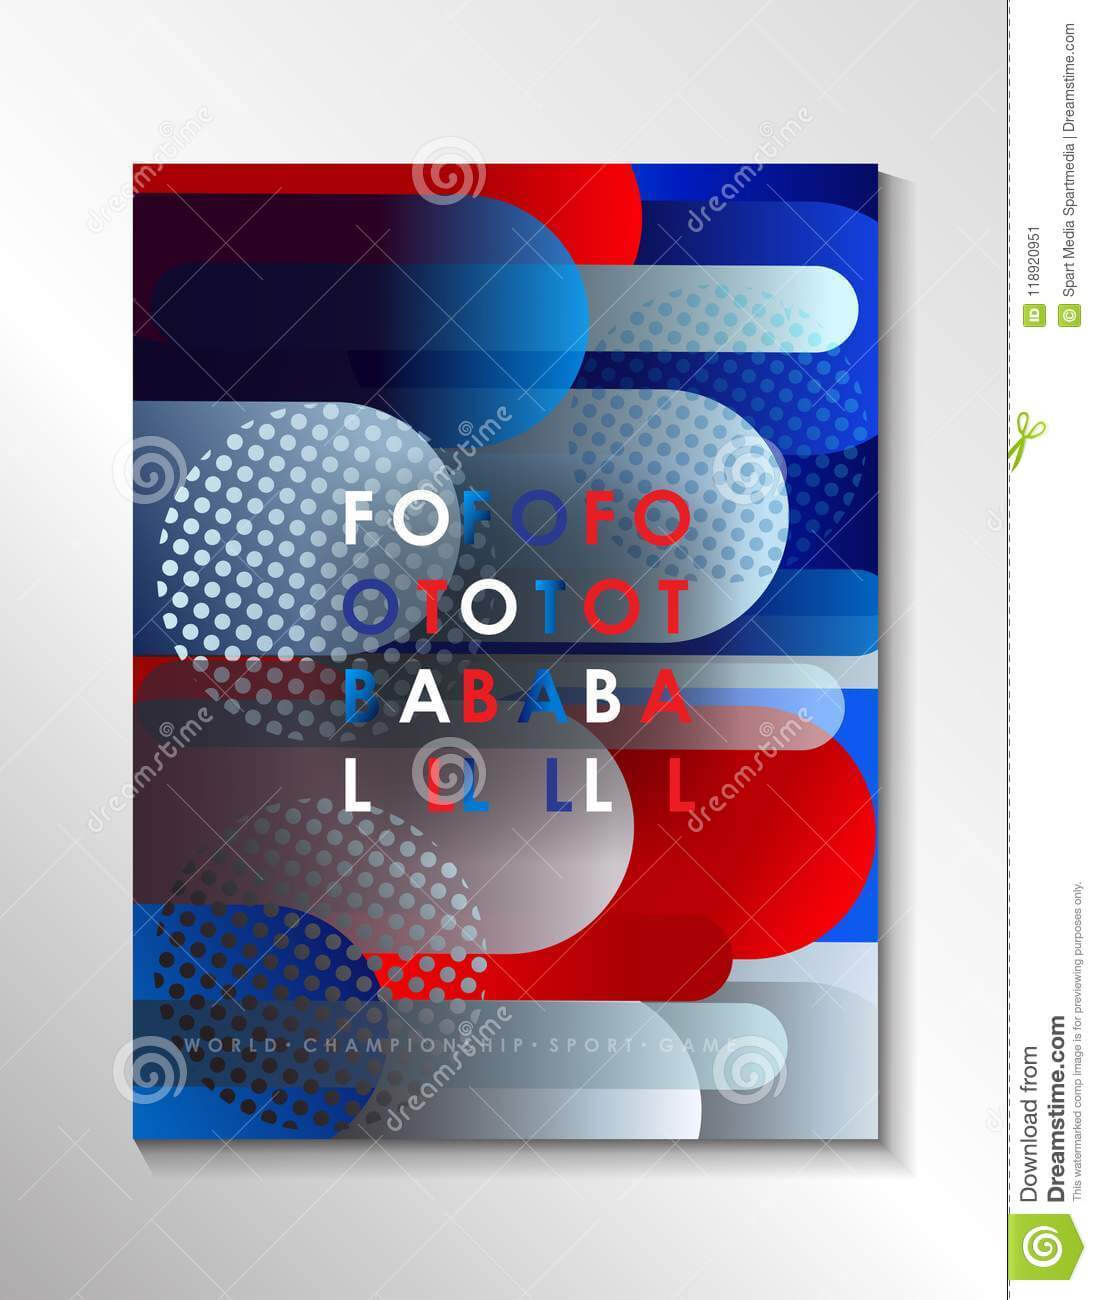 Football World Cup 2018 Russia Soccer Stock Vector Inside Soccer Report Card Template